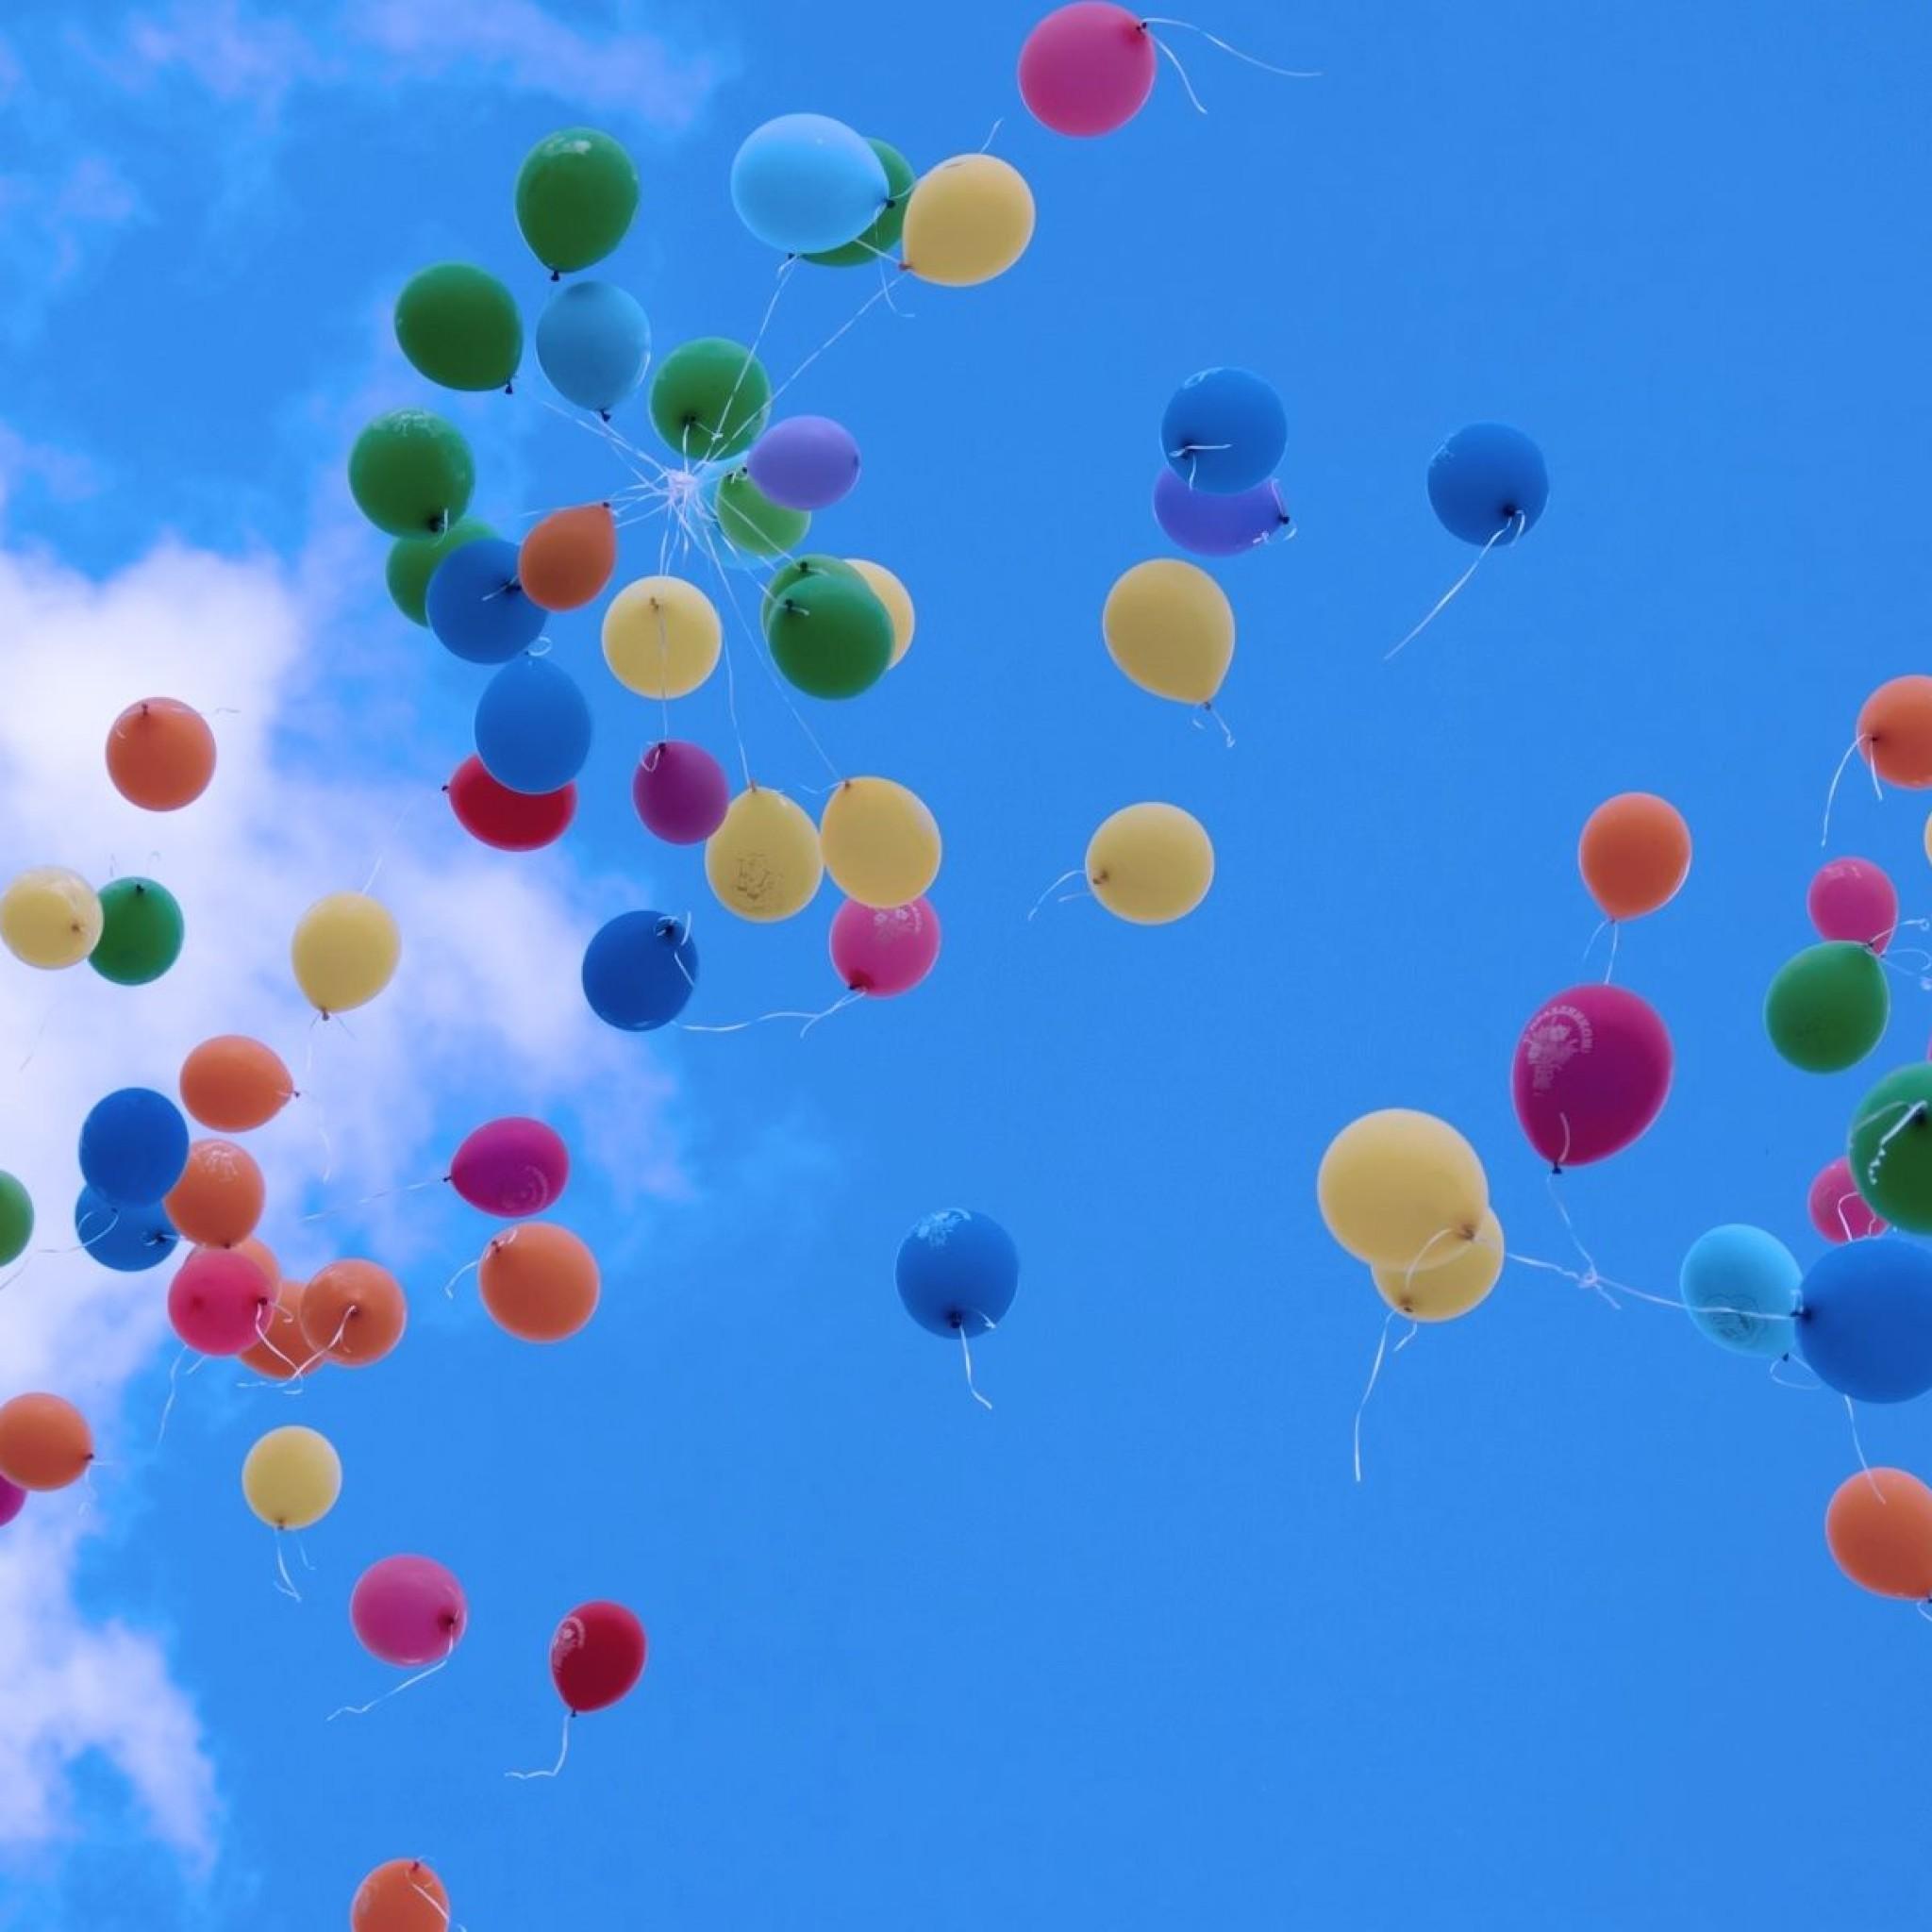 Colorful Balloons In The Sky iPad Air Wallpaper Free Download